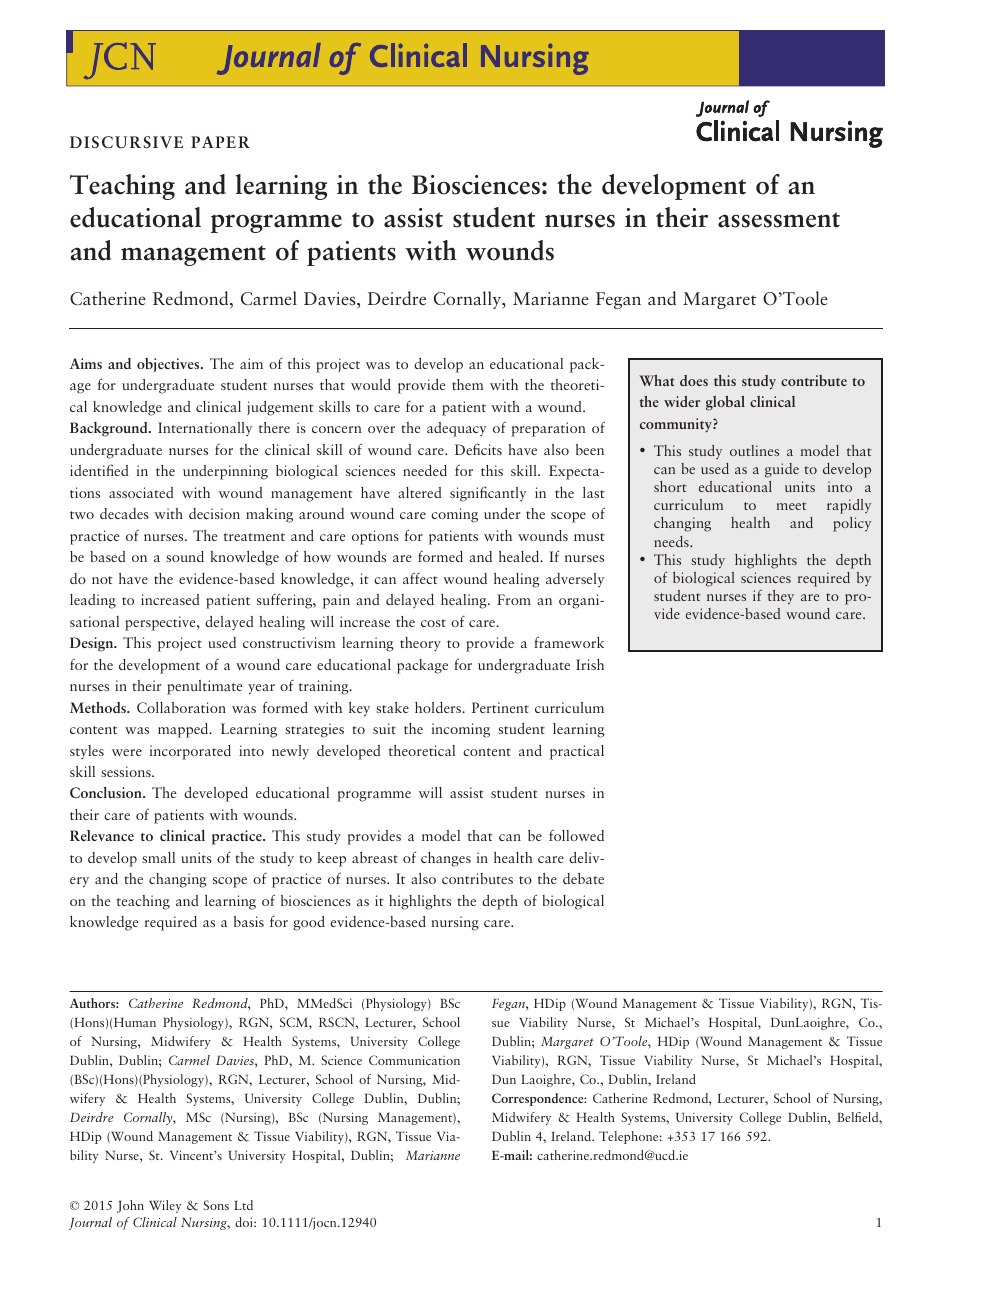 Teaching And Learning In The Biosciences The Development Of An Educational Programme To Assist Student Nurses In Their Assessment And Management Of Patients With Wounds Topic Of Research Paper In Educational